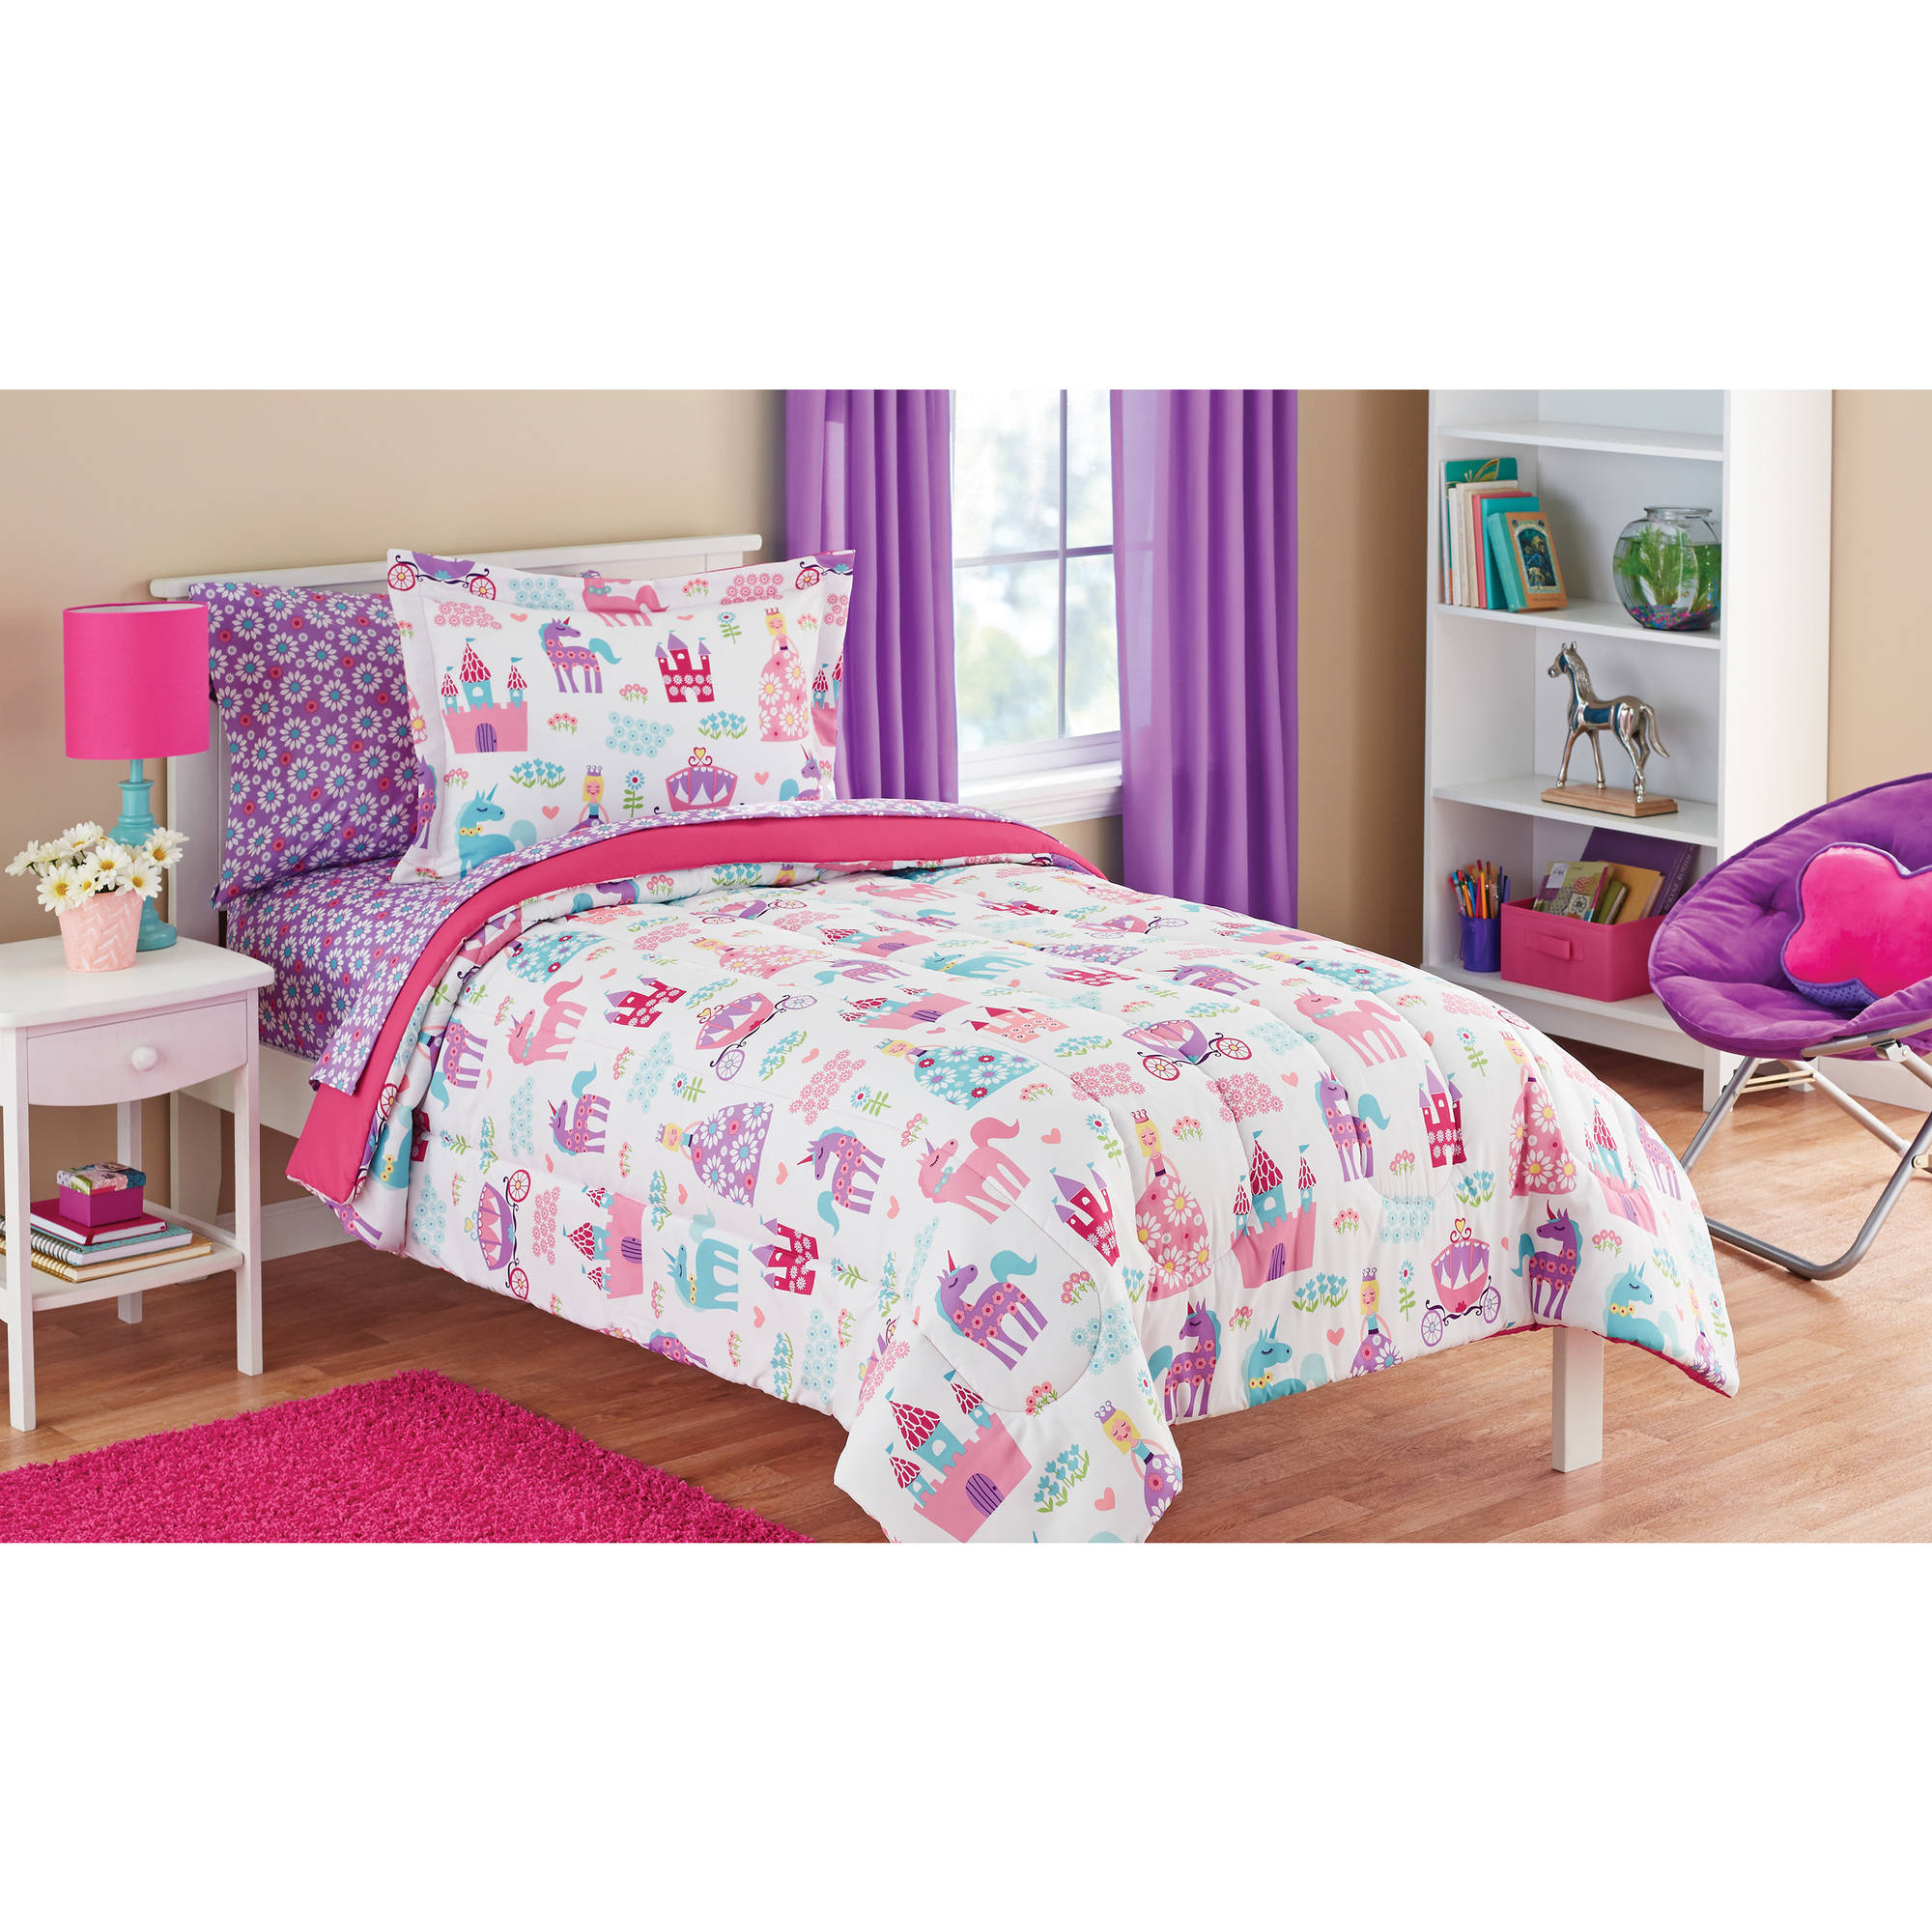 Mainstays Kids Pretty Princess Coordinated Bed In A Bag 1 Each inside size 2000 X 2000